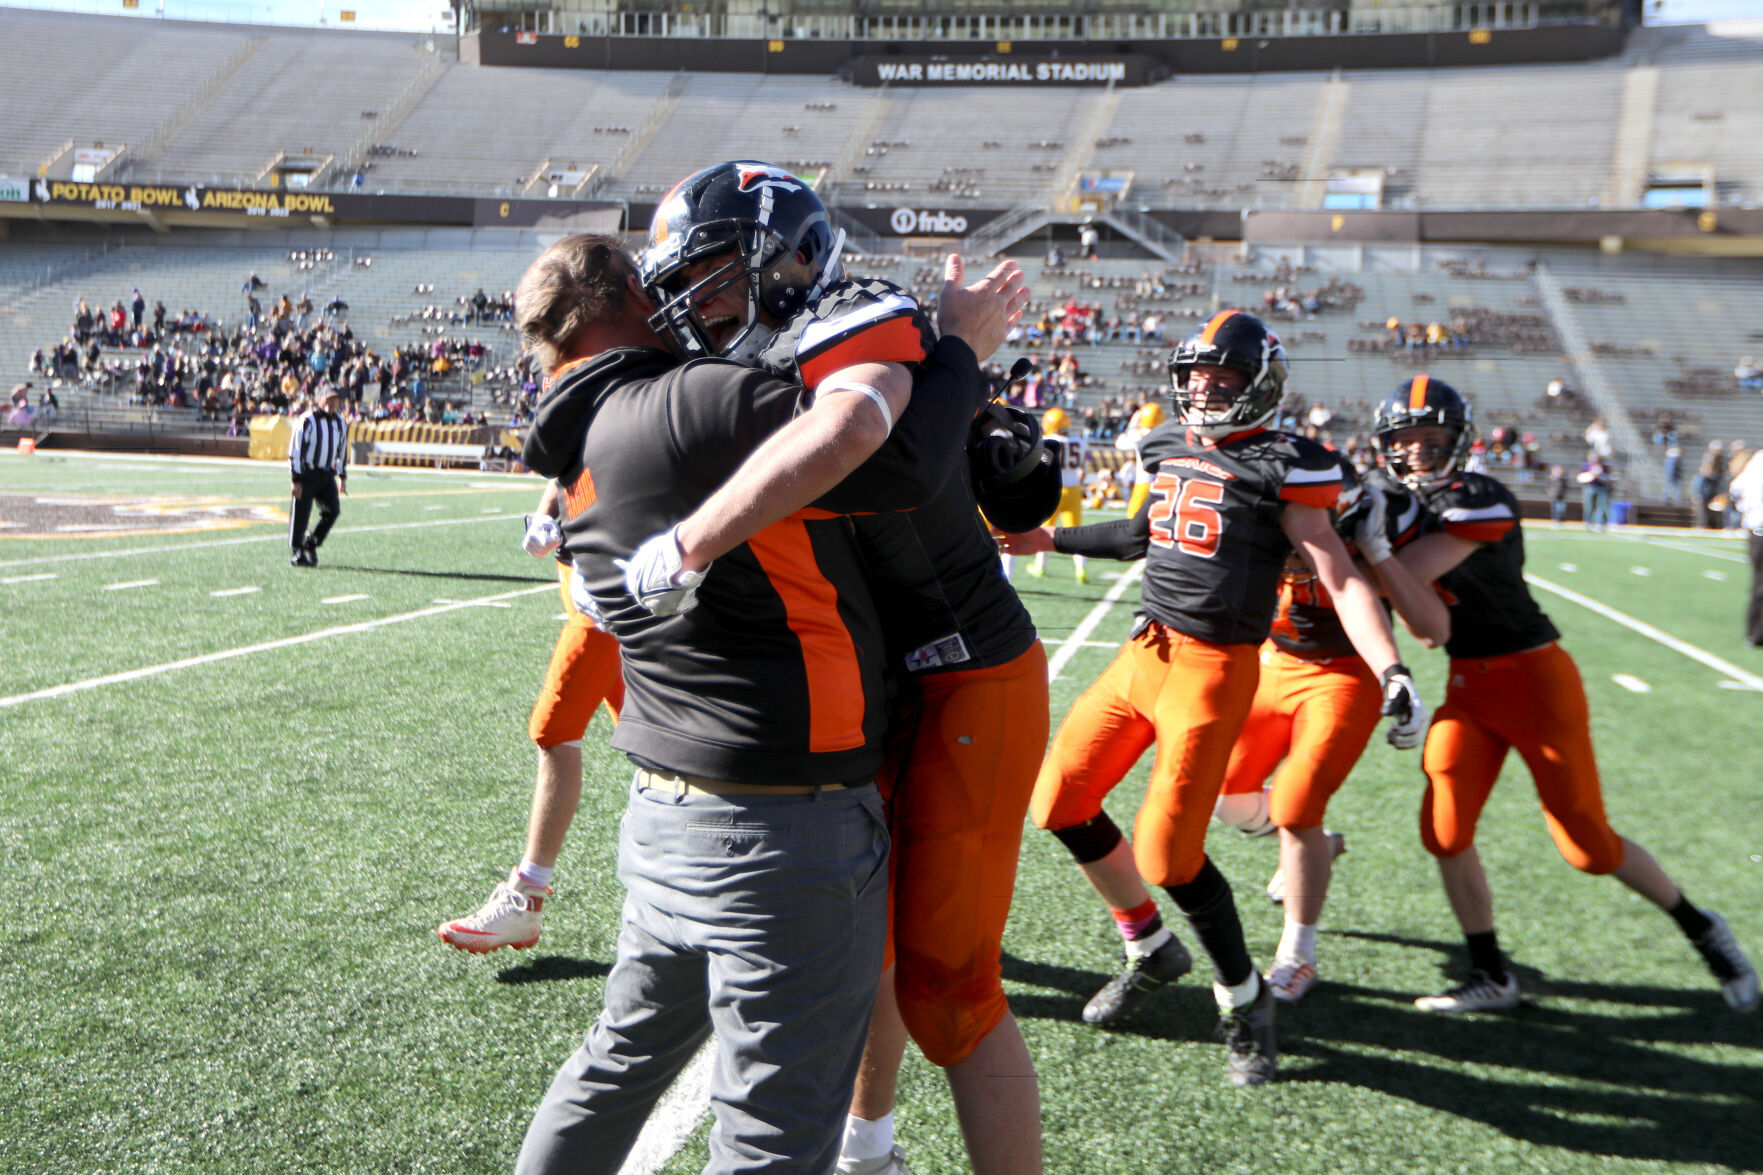 Burlington Ends Snake River’s 30-Game Winning Streak to Secure First State Title Since 1994